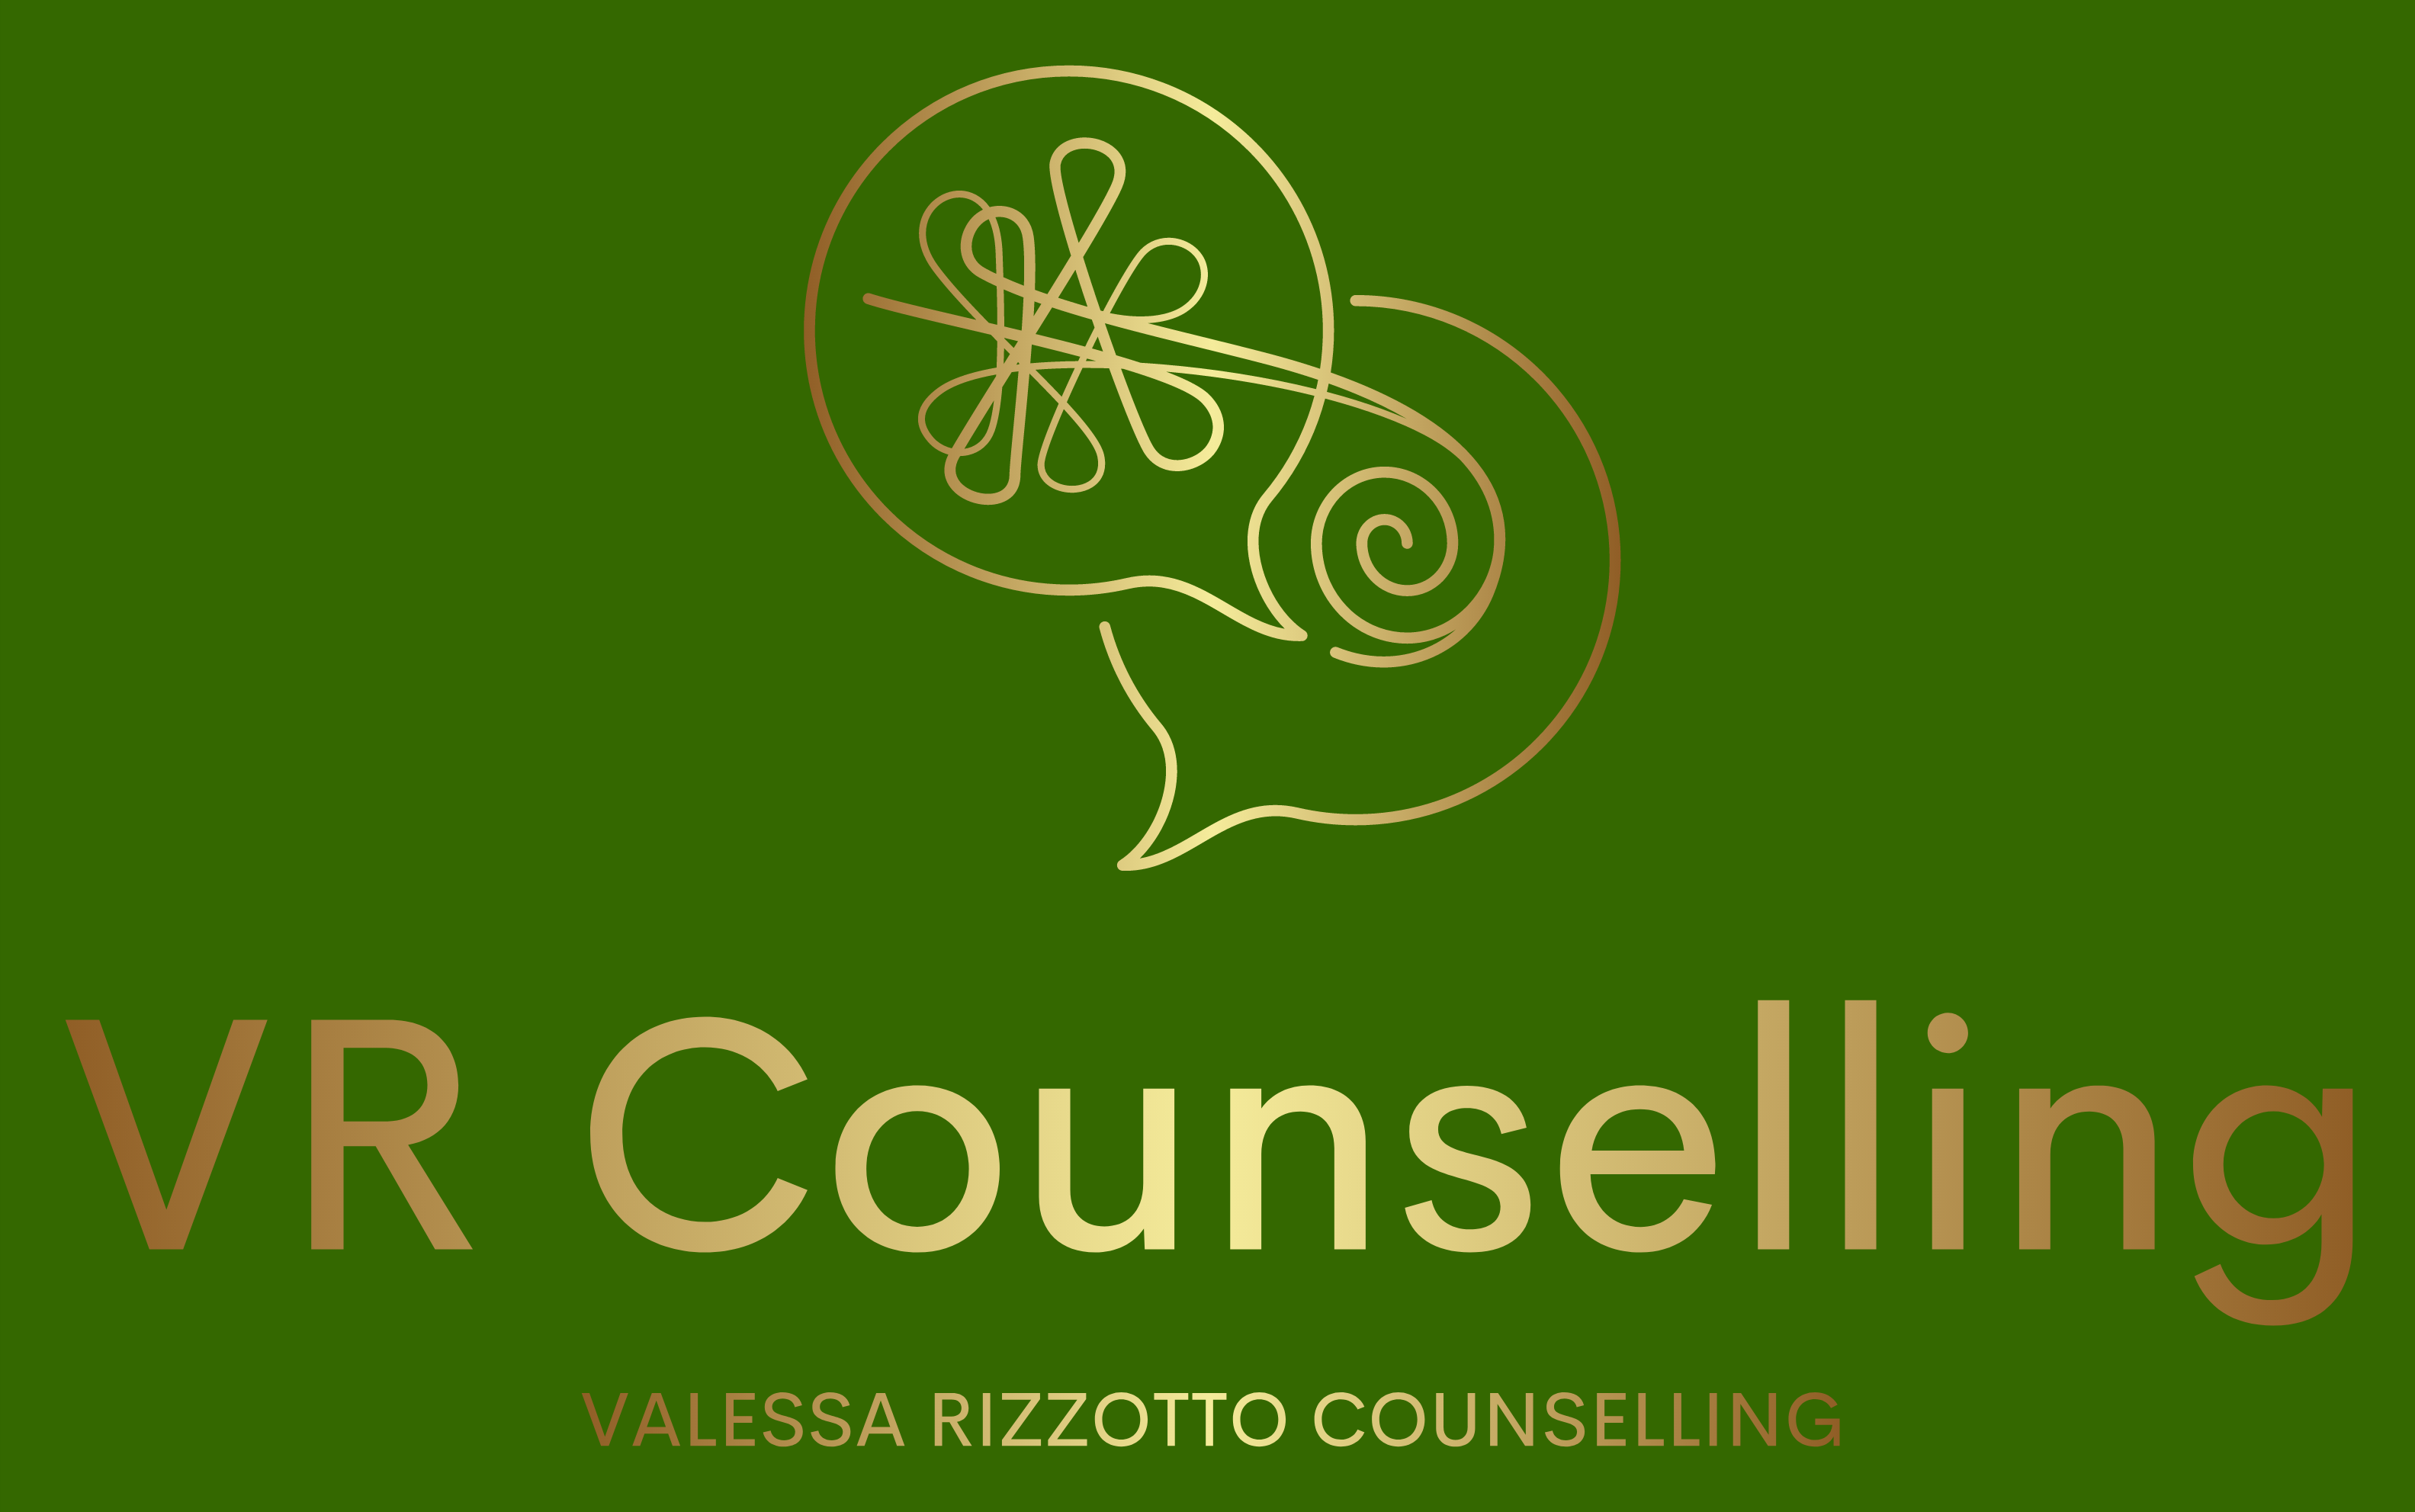 VR Counselling